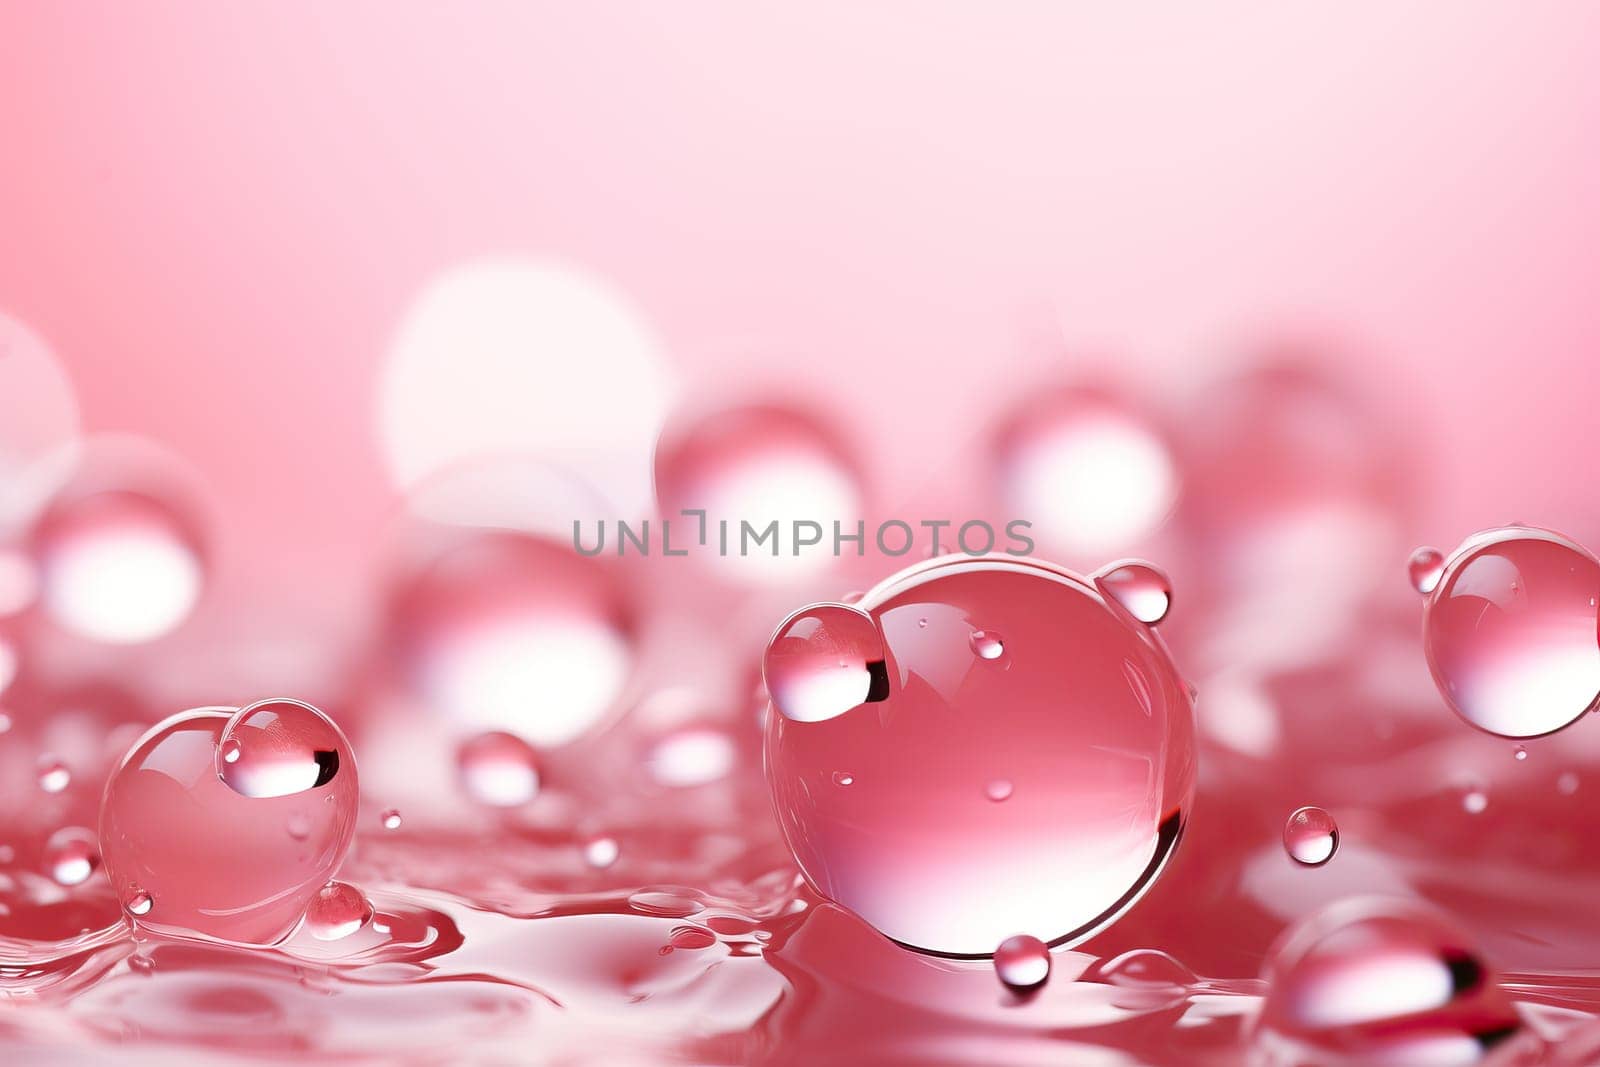 Abstract pink background with drops of various round shapes, pink macro drops of water.